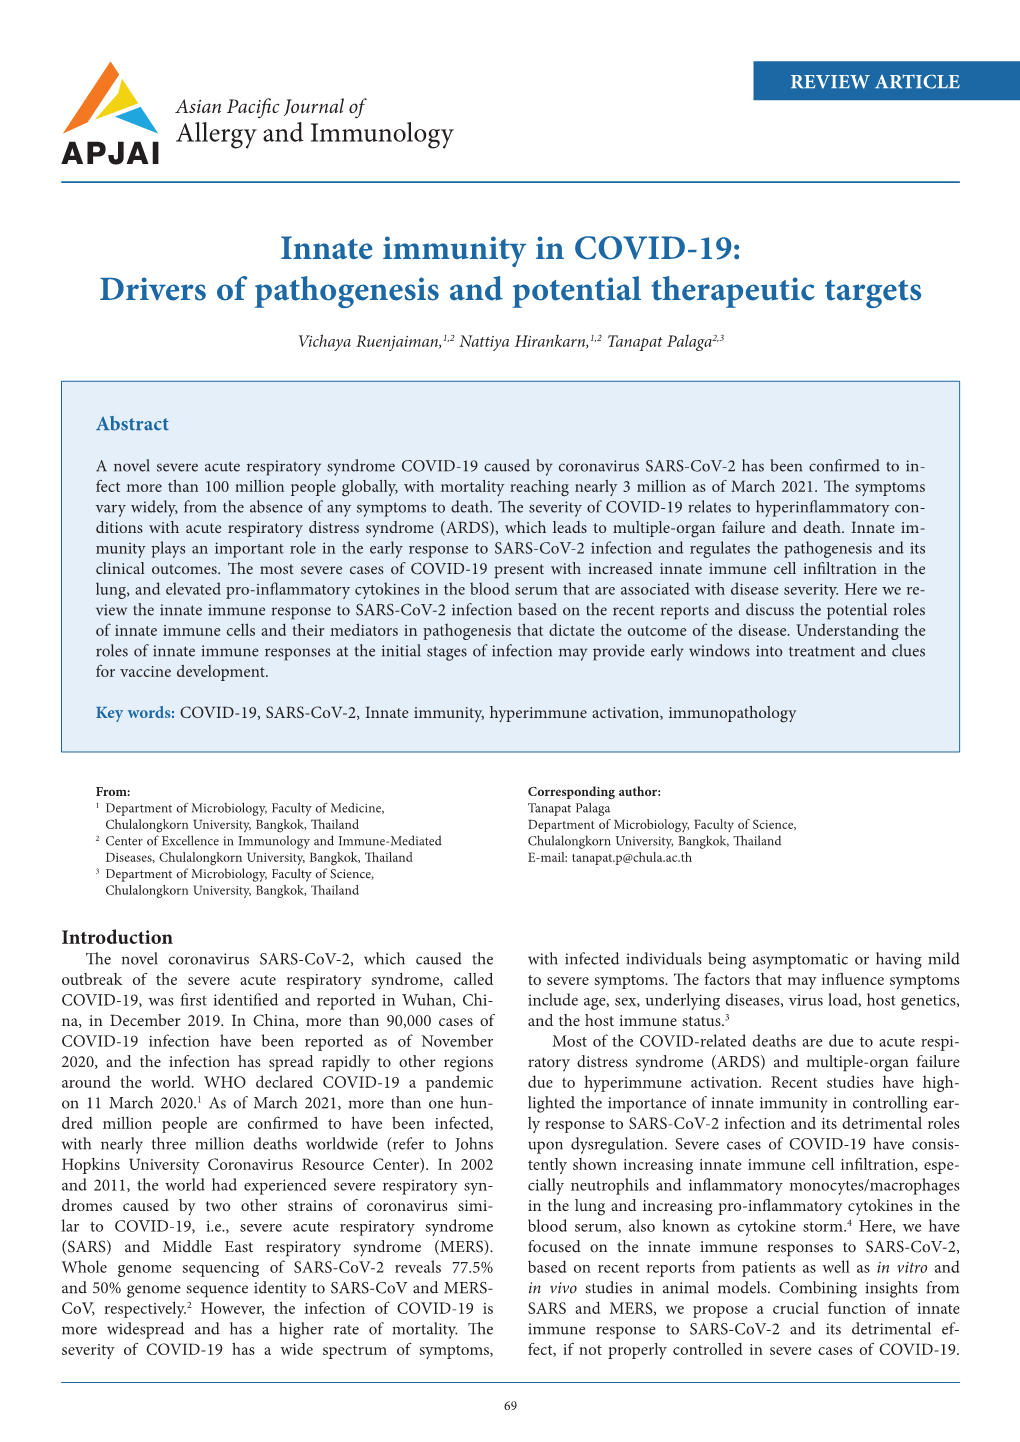 Innate Immunity in COVID-19: Drivers of Pathogenesis and Potential Therapeutic Targets